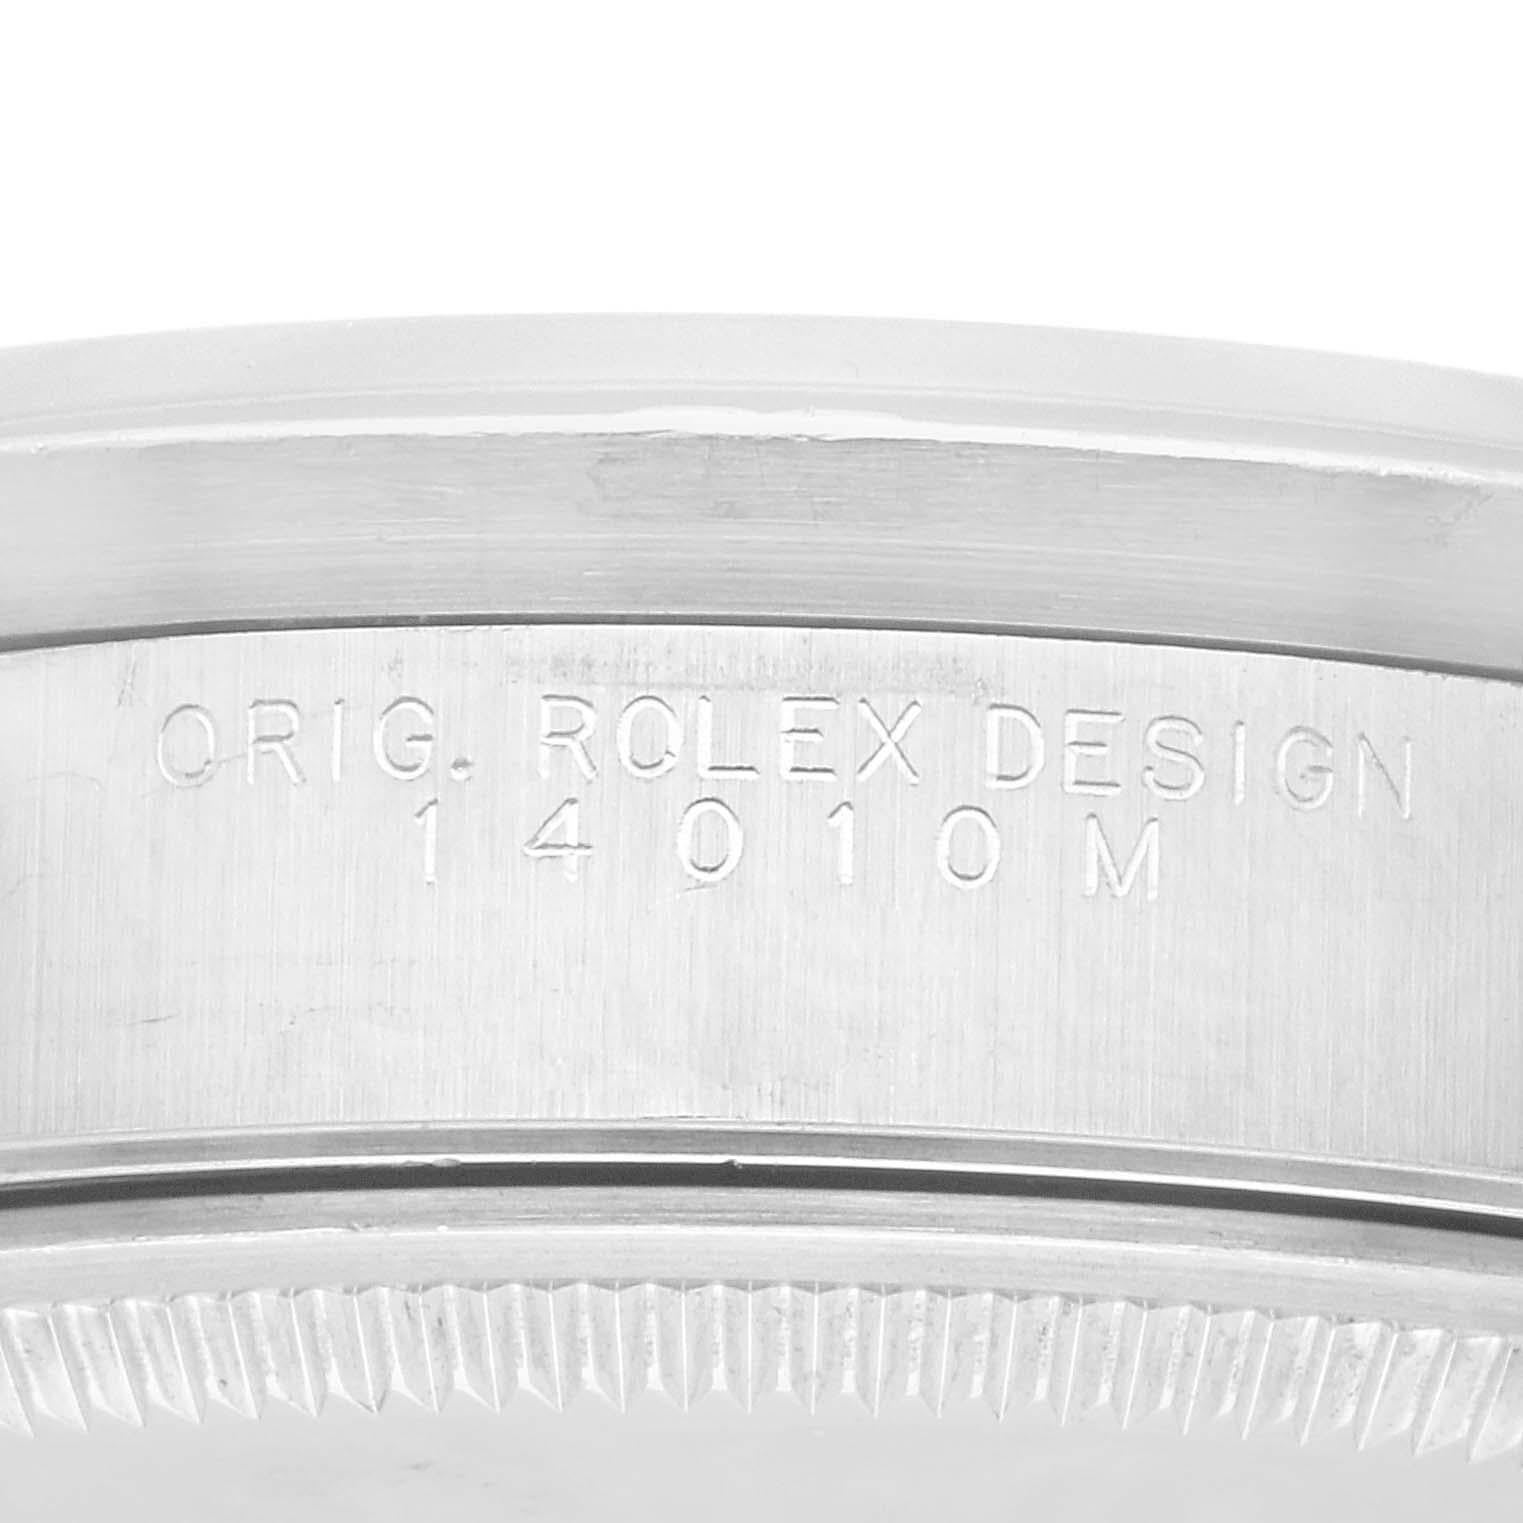 Rolex Air King Engine Turned Bezel Silver Dial Steel Mens Watch 14010 Box Papers. Automatic self-winding movement. Stainless steel case 34.0 mm in diameter. Rolex logo on the crown. Stainless steel engine turned bezel. Scratch resistant sapphire